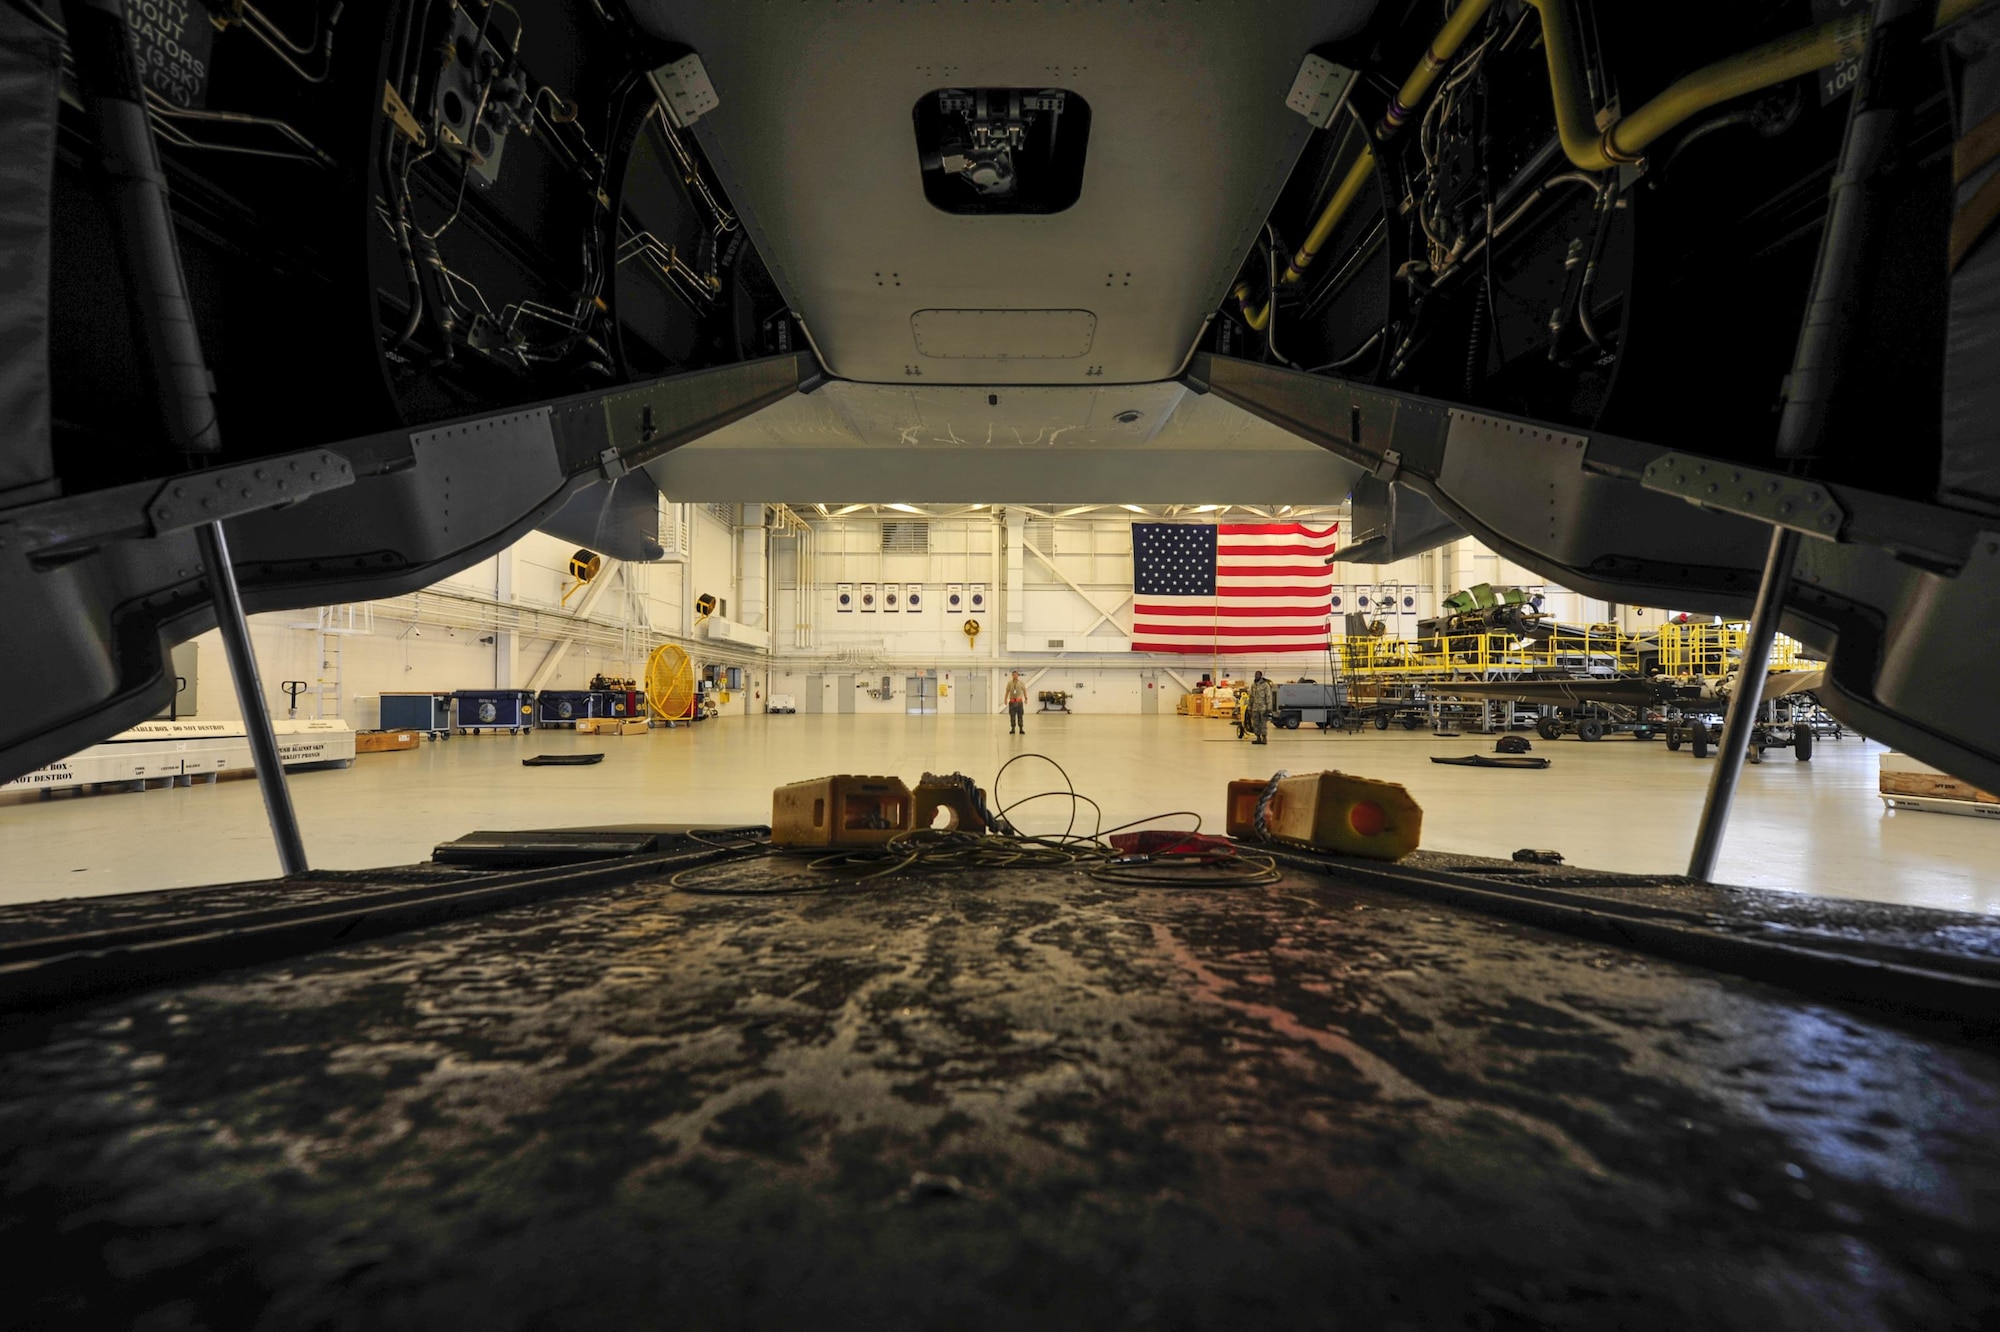 Crew chiefs with the 801st Special Operations Aircraft Maintenance Squadron tow a CV-22B Osprey tiltrotor aircraft into the Freedom Hangar at Hurlburt Field, Fla., Aug. 11, 2016. The 801st SOAMXS crew chiefs continued normal operations despite the inclement weather. (U.S. Air Force photo by Airman 1st Class Joseph Pick)